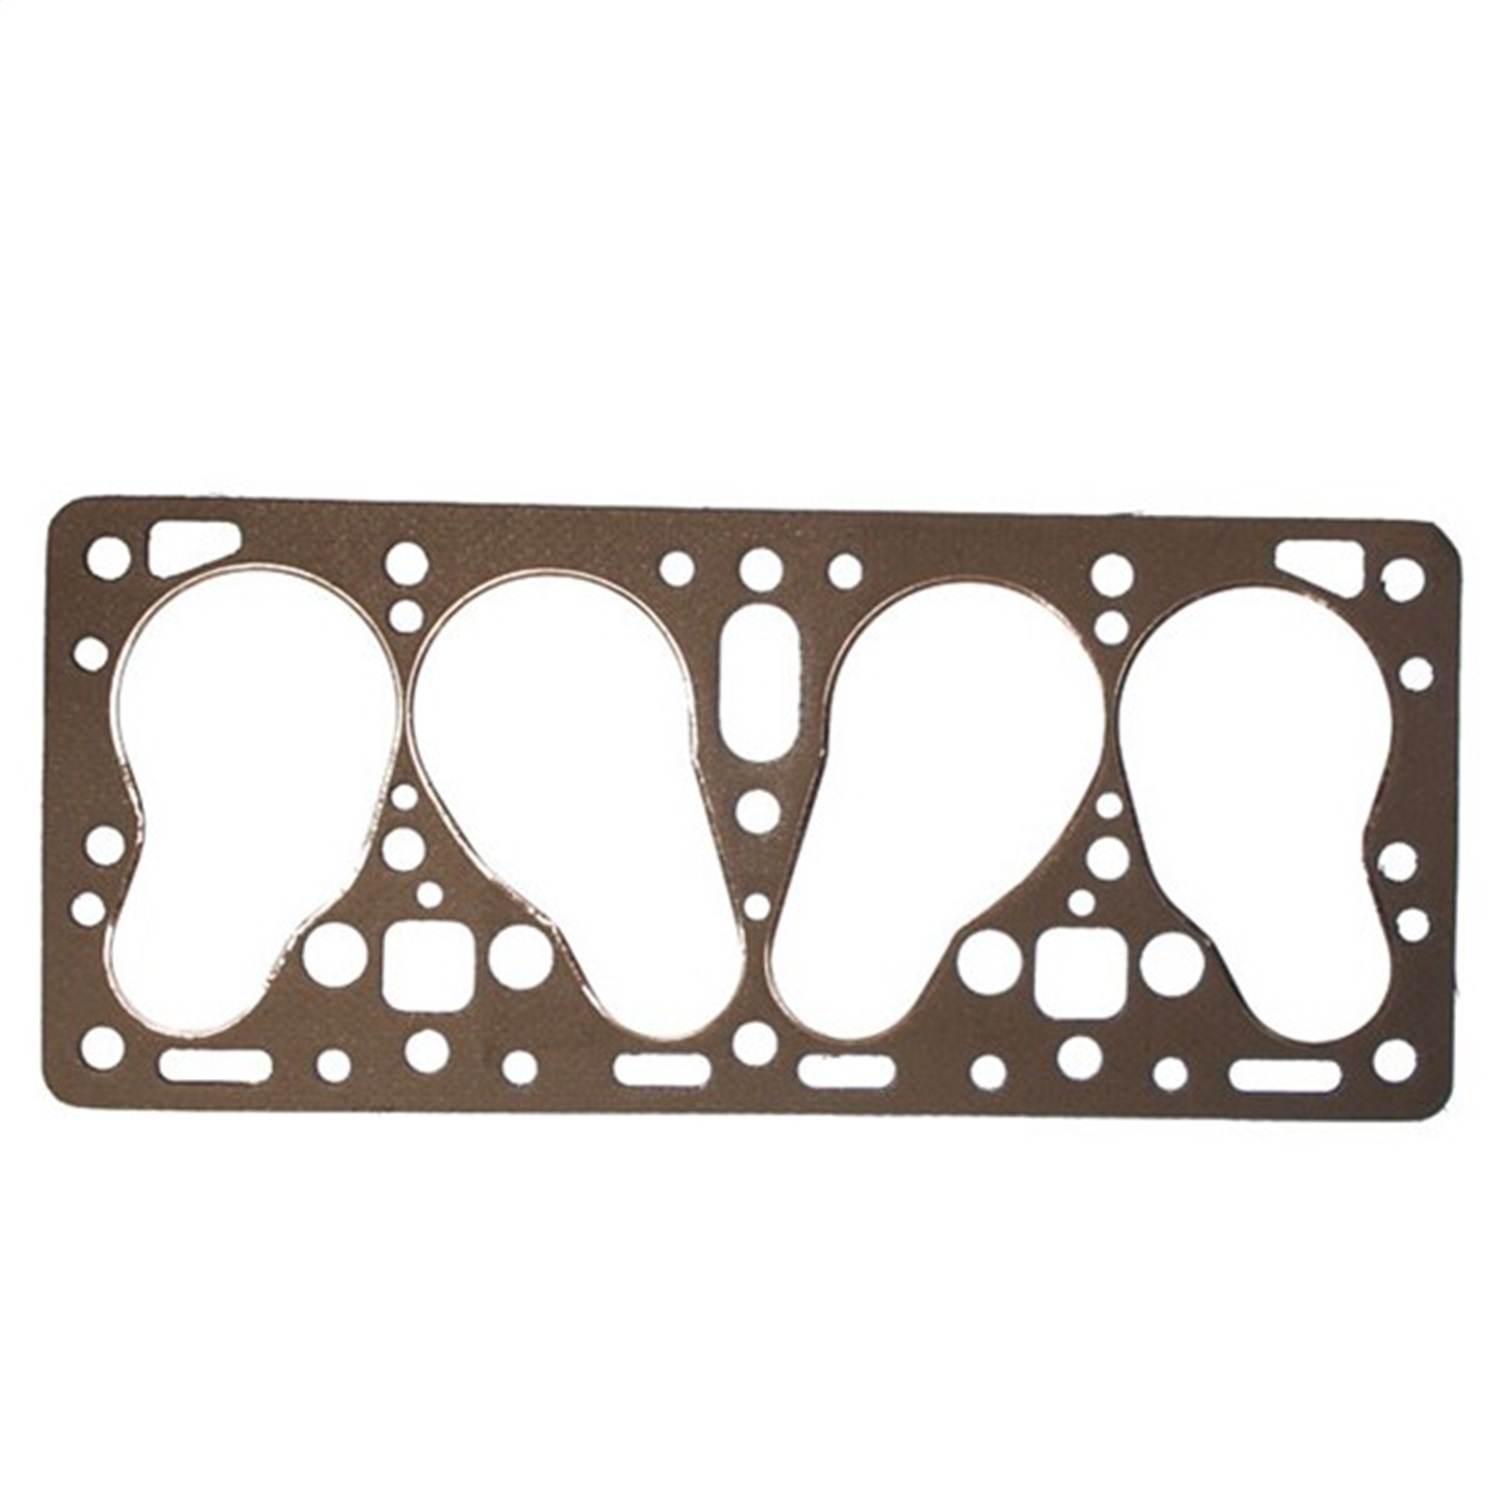 Jeep Omix This Replacement Cylinder Head Gasket From Omix Fits The 134 Cubic Inch F-Head Engine